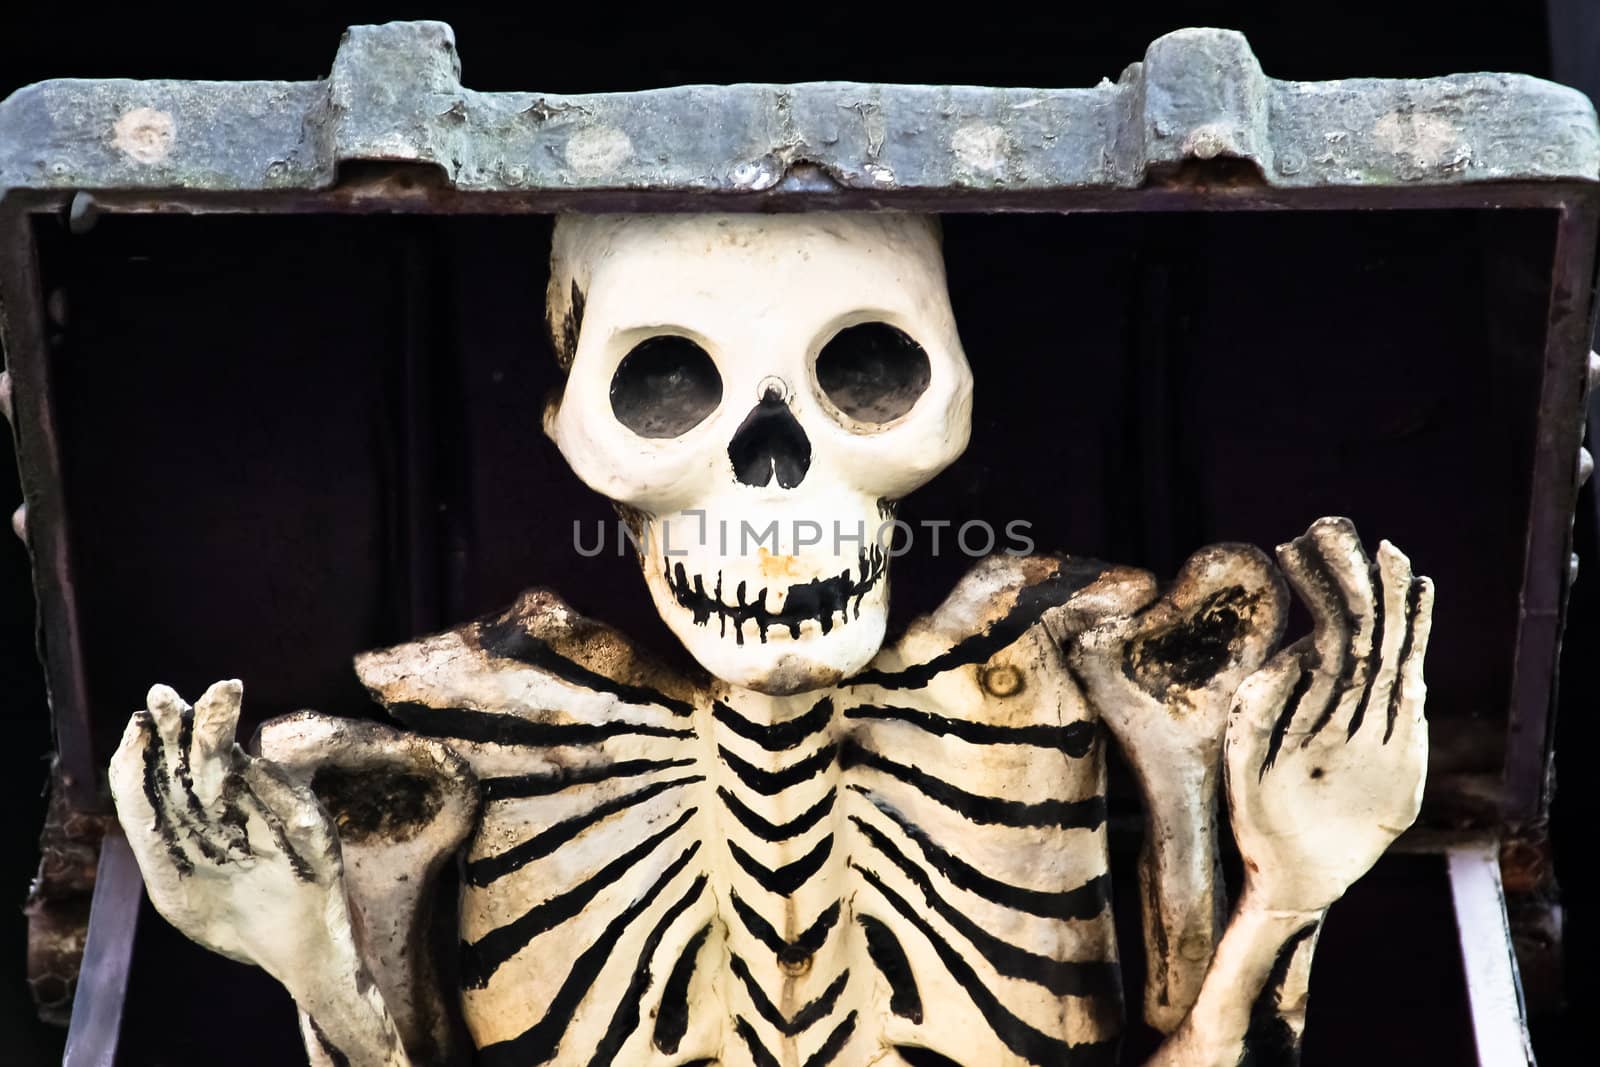 Skeleton out of the box in a haunted house